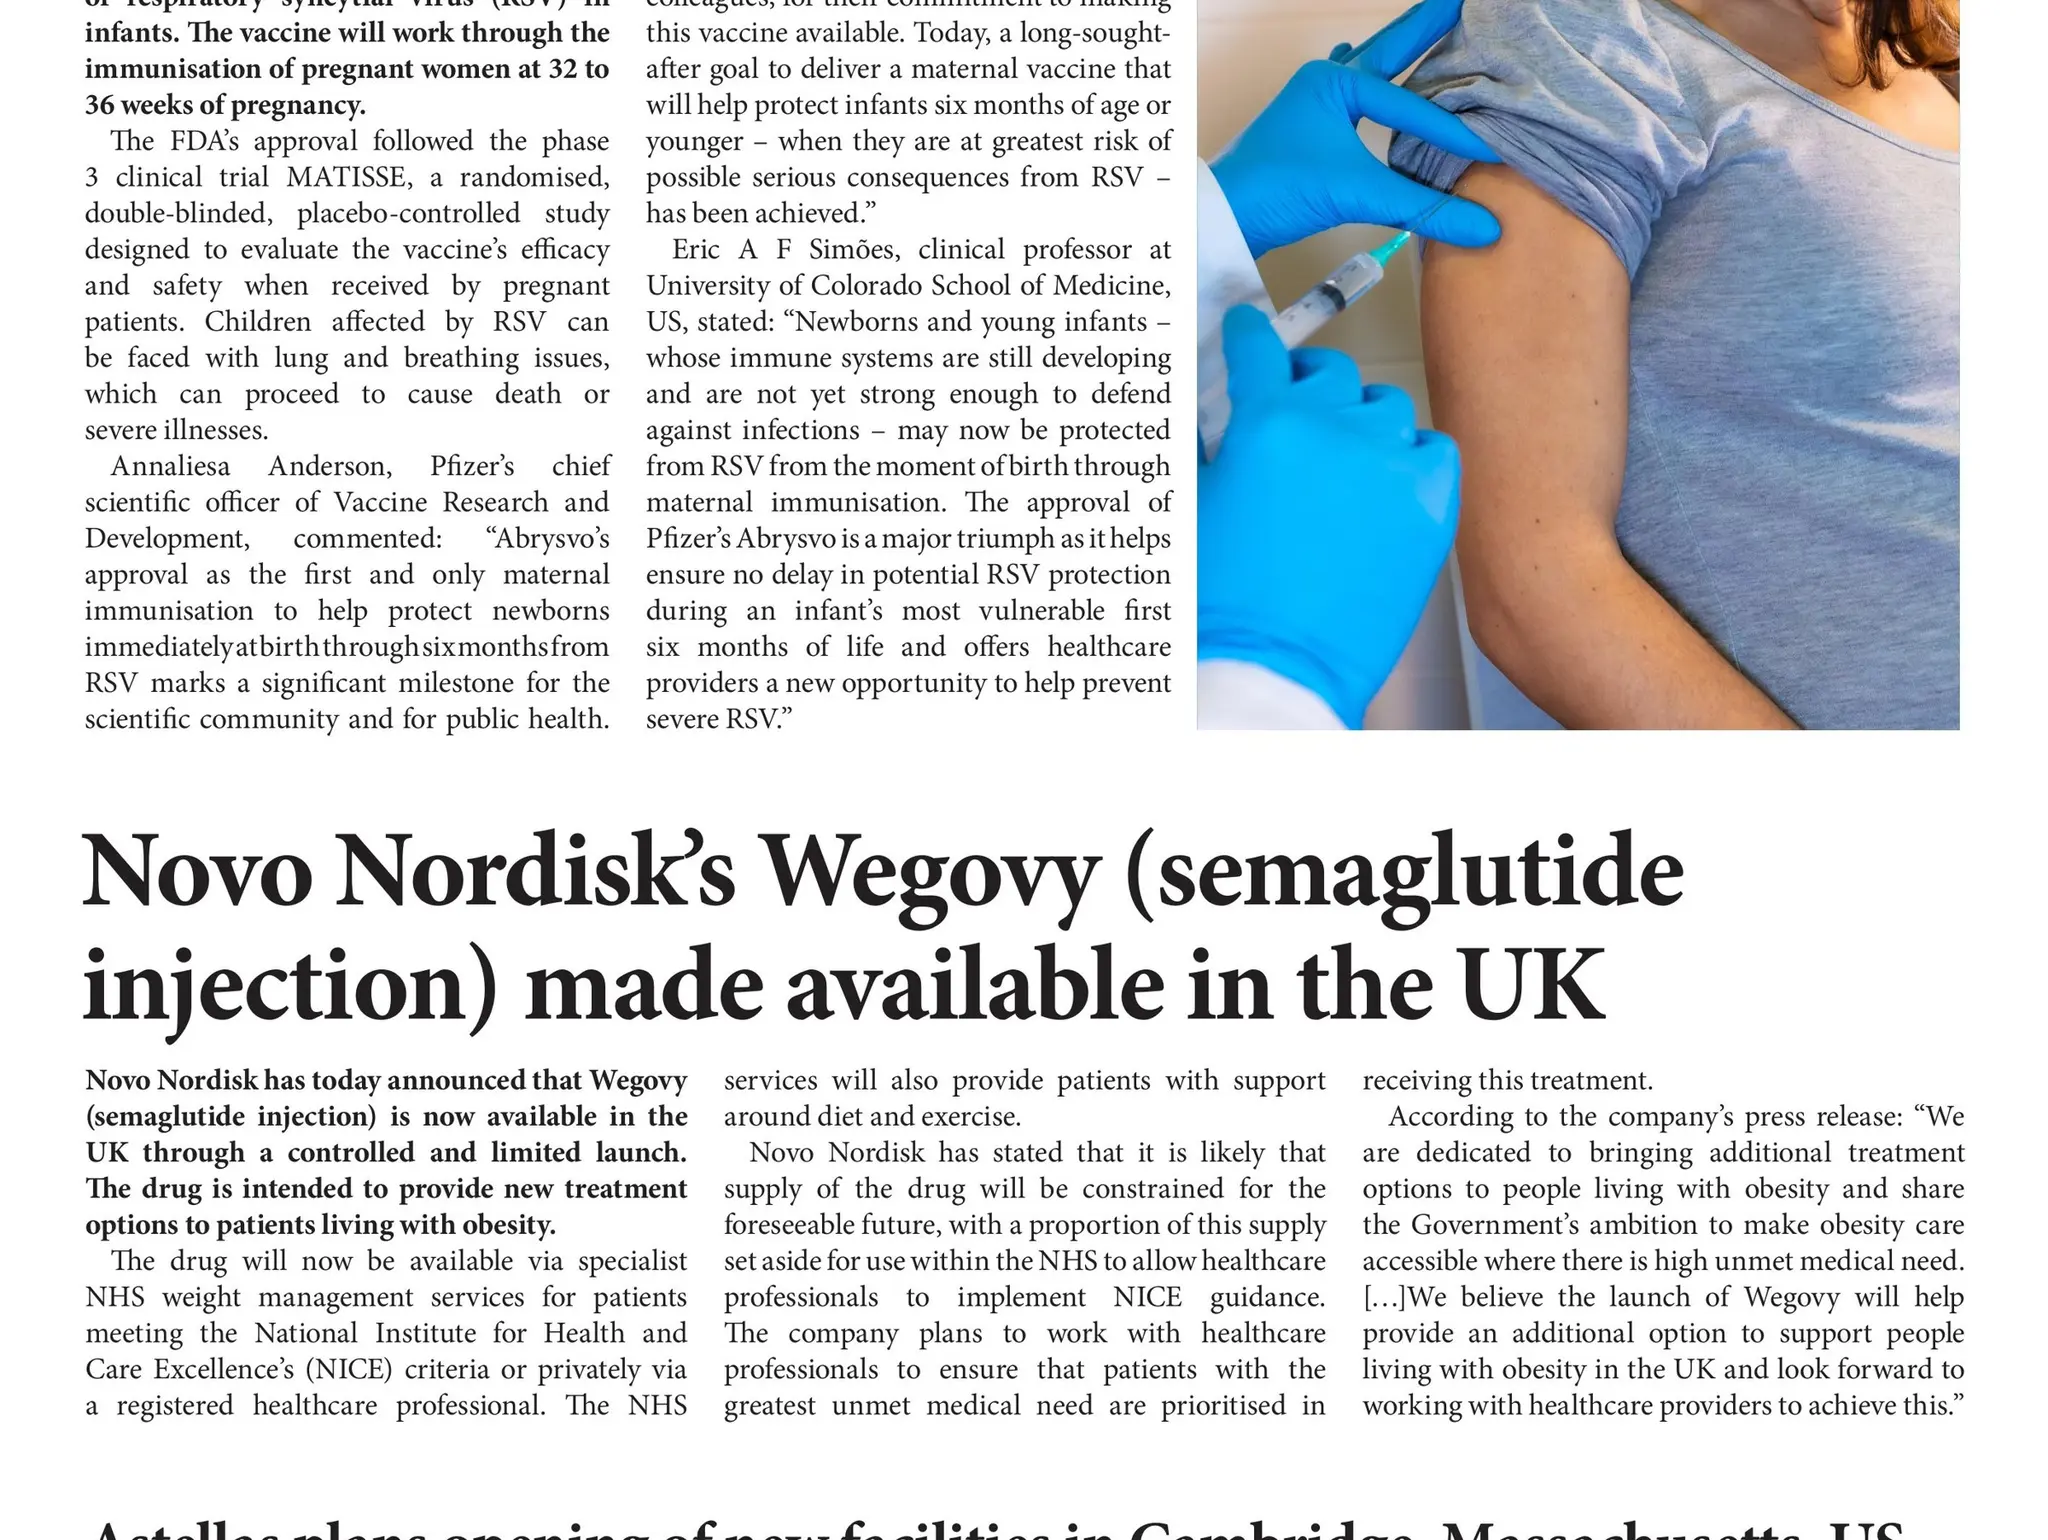 Novo Nordisk’s Wegovy (semaglutide injection) made available in the UK